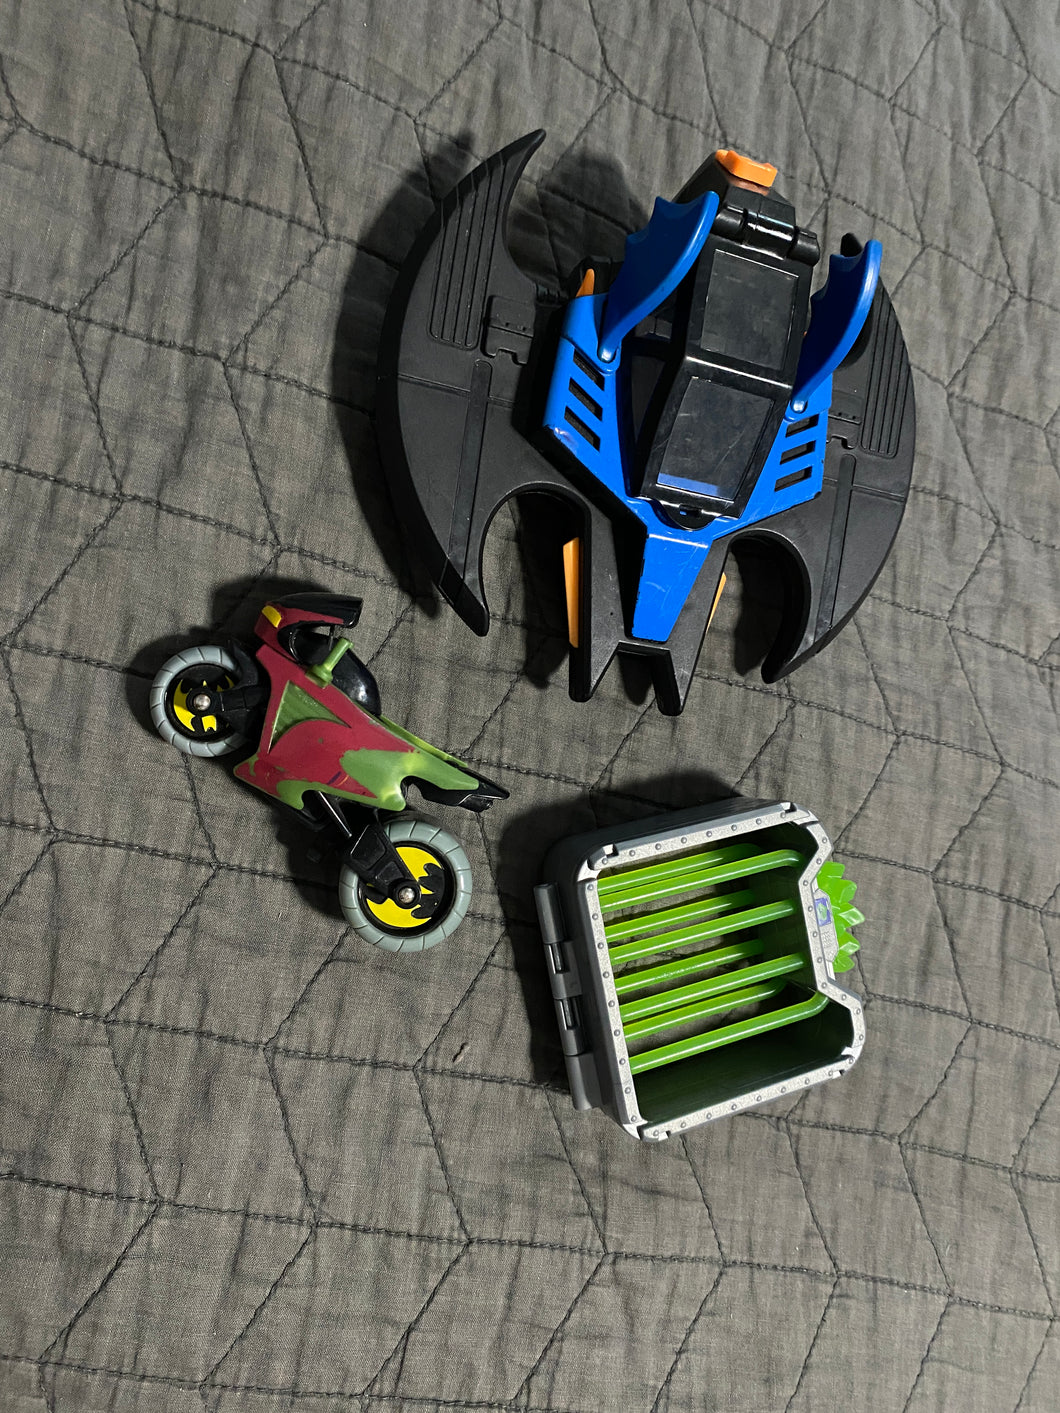 Imaginext DC batman toys motorcycle, jail and batwing